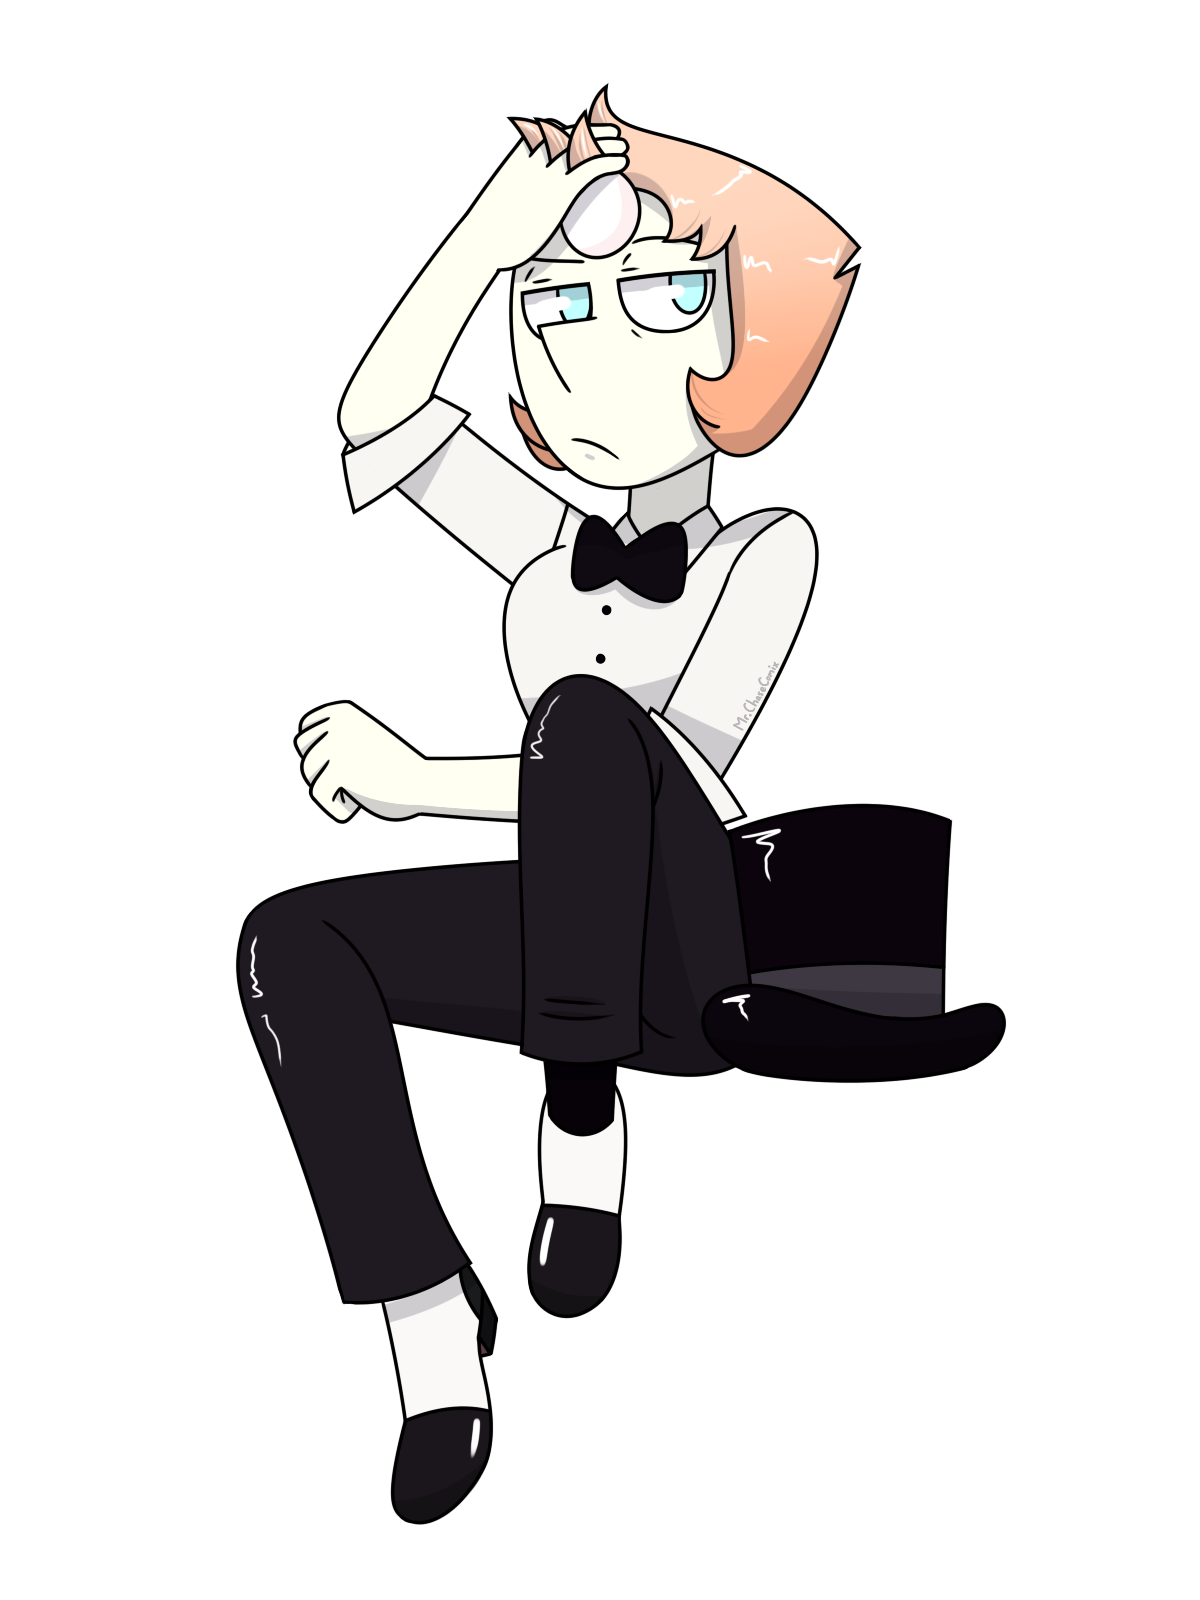 Tux Porl (Pose Practice) I’ve been dying to draw some tux Pearl for a while now. Honestly, I really wanted to do this again because I thought my past tux drawings were not really satisfying. This time...